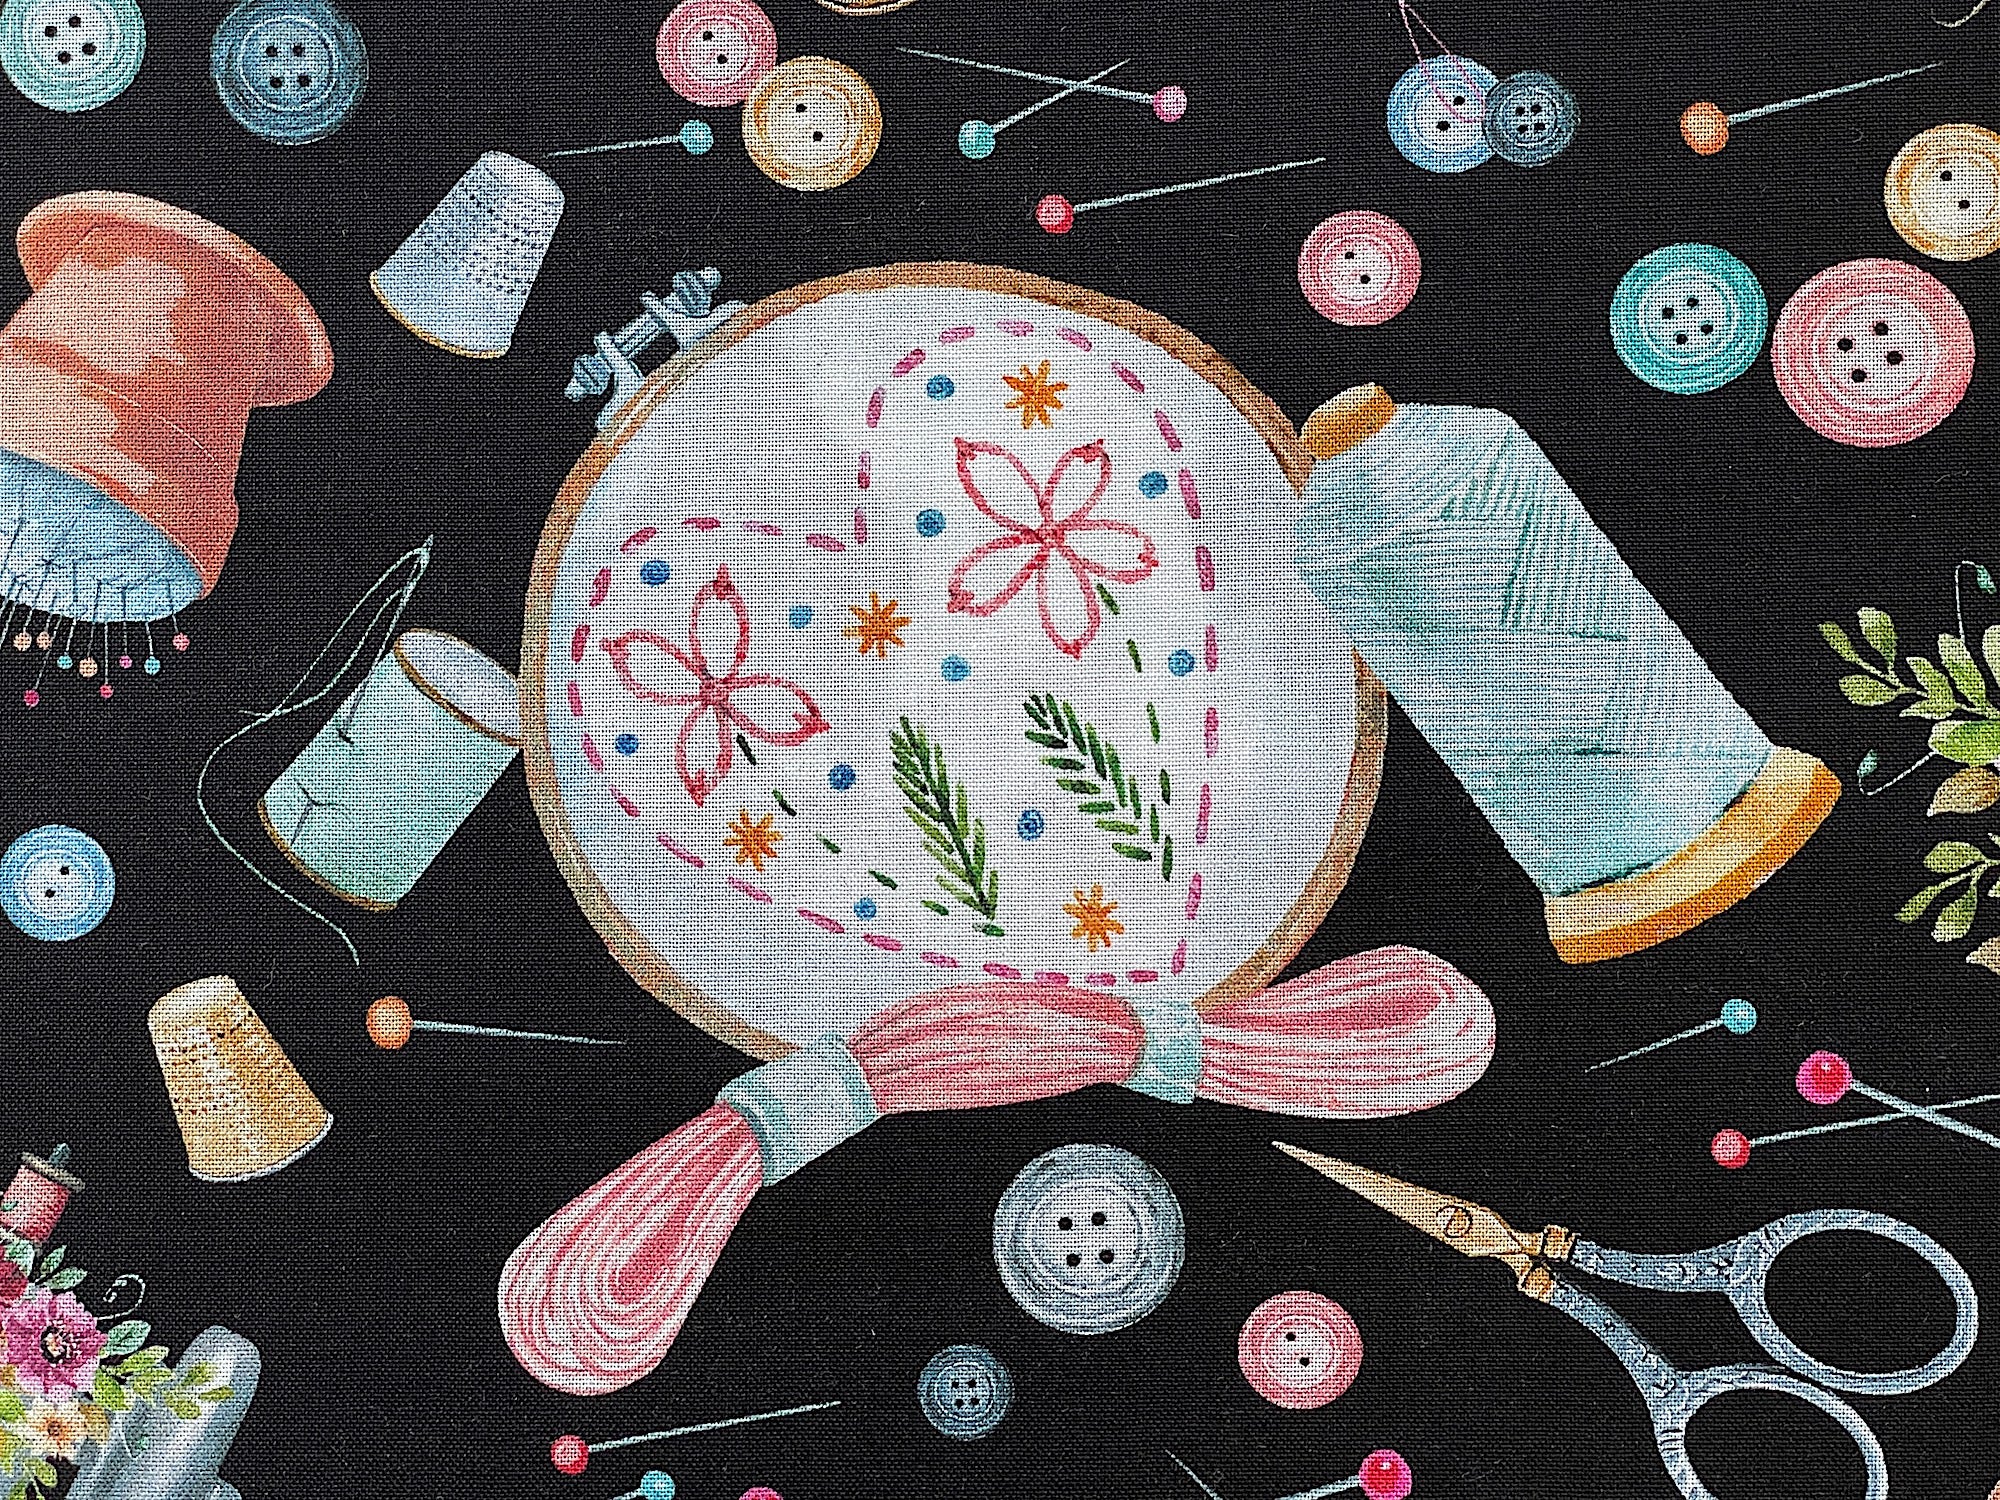 Close up of a completed hand embroidery project, scissors, buttons and more.